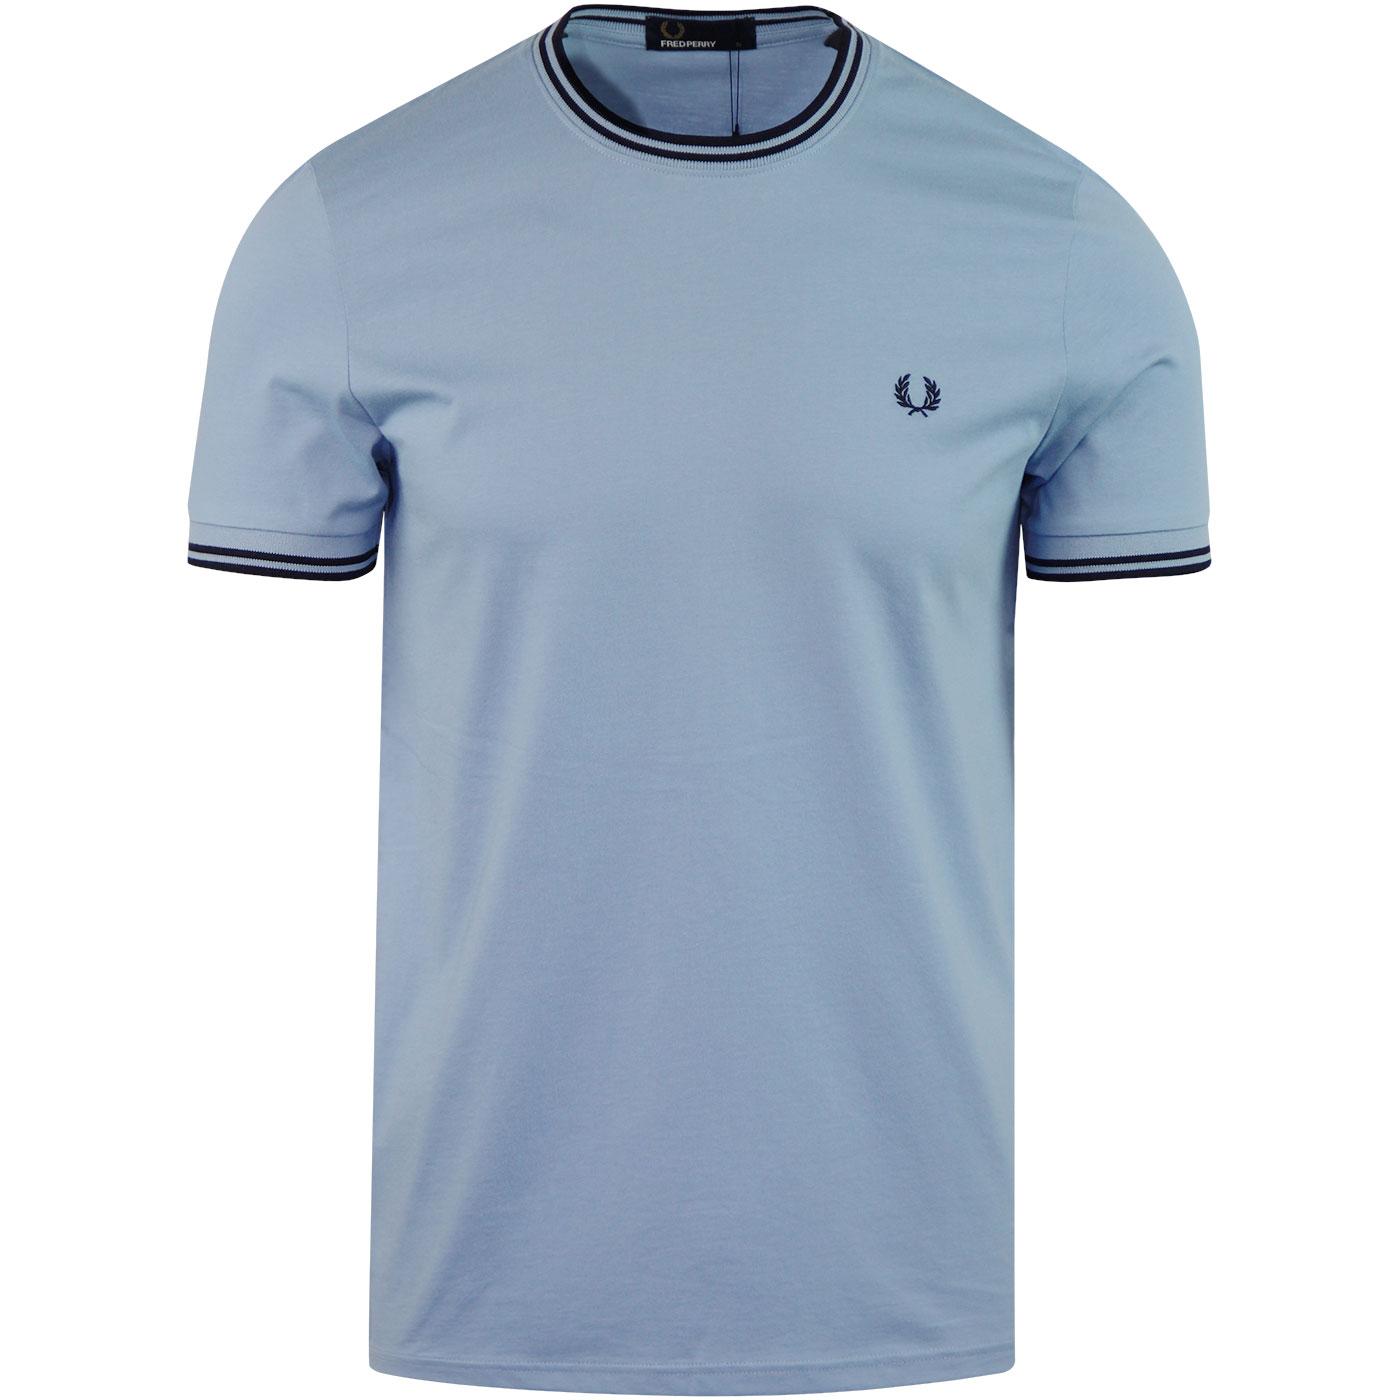 FRED PERRY Retro Mod Twin Tipped Crew T-shirt SKY